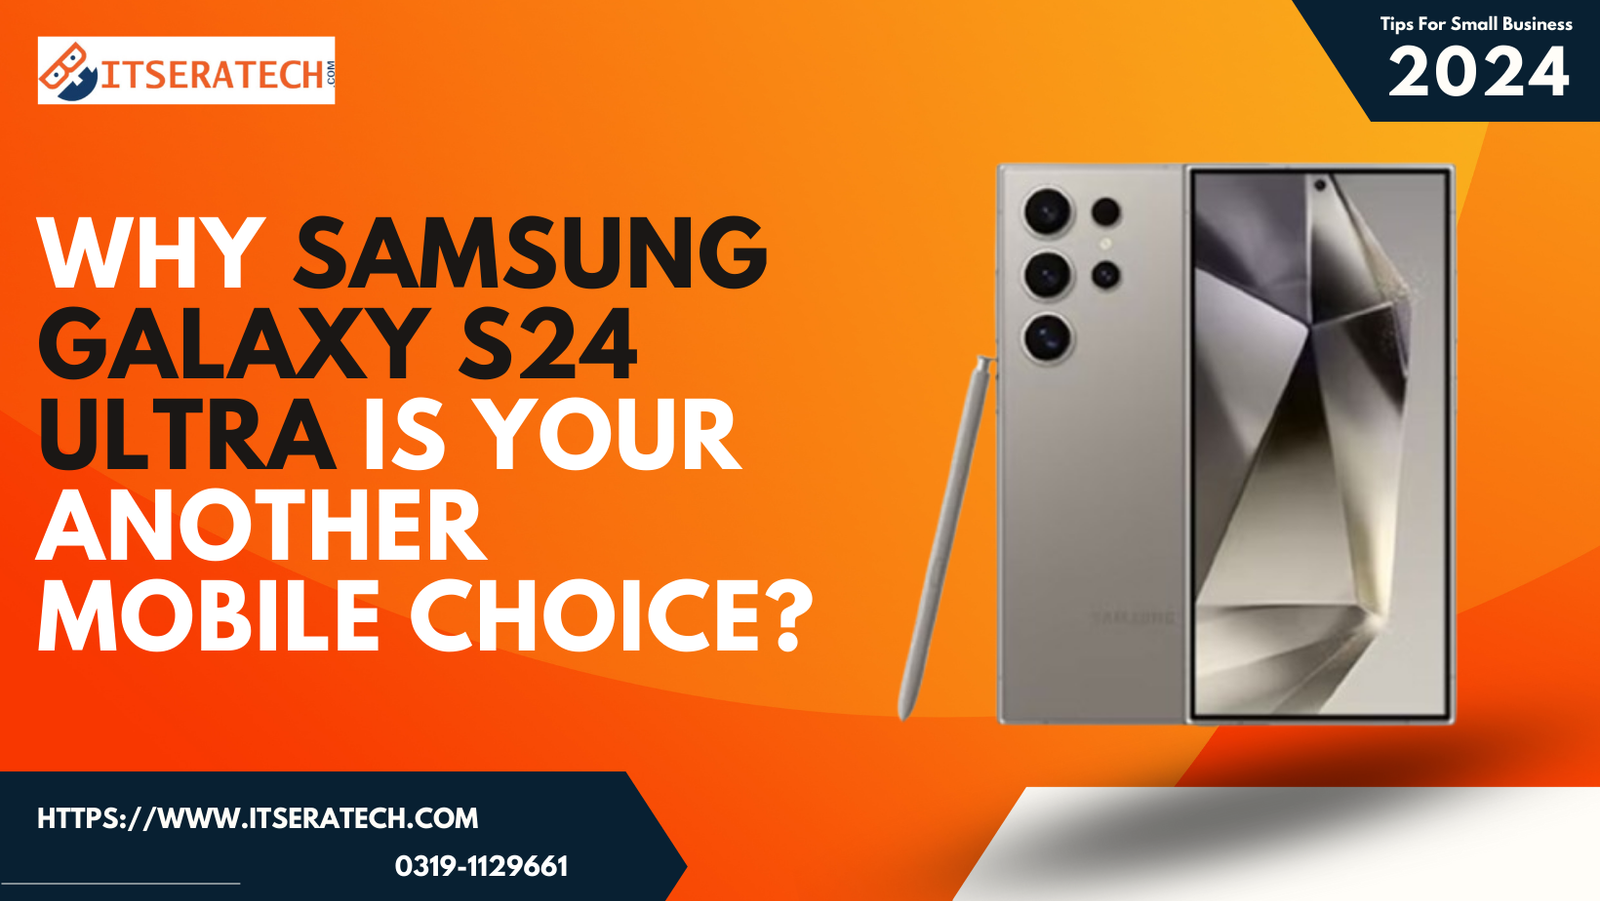 Why Samsung Galaxy S24 Ultra is Your Another Mobile Choice?